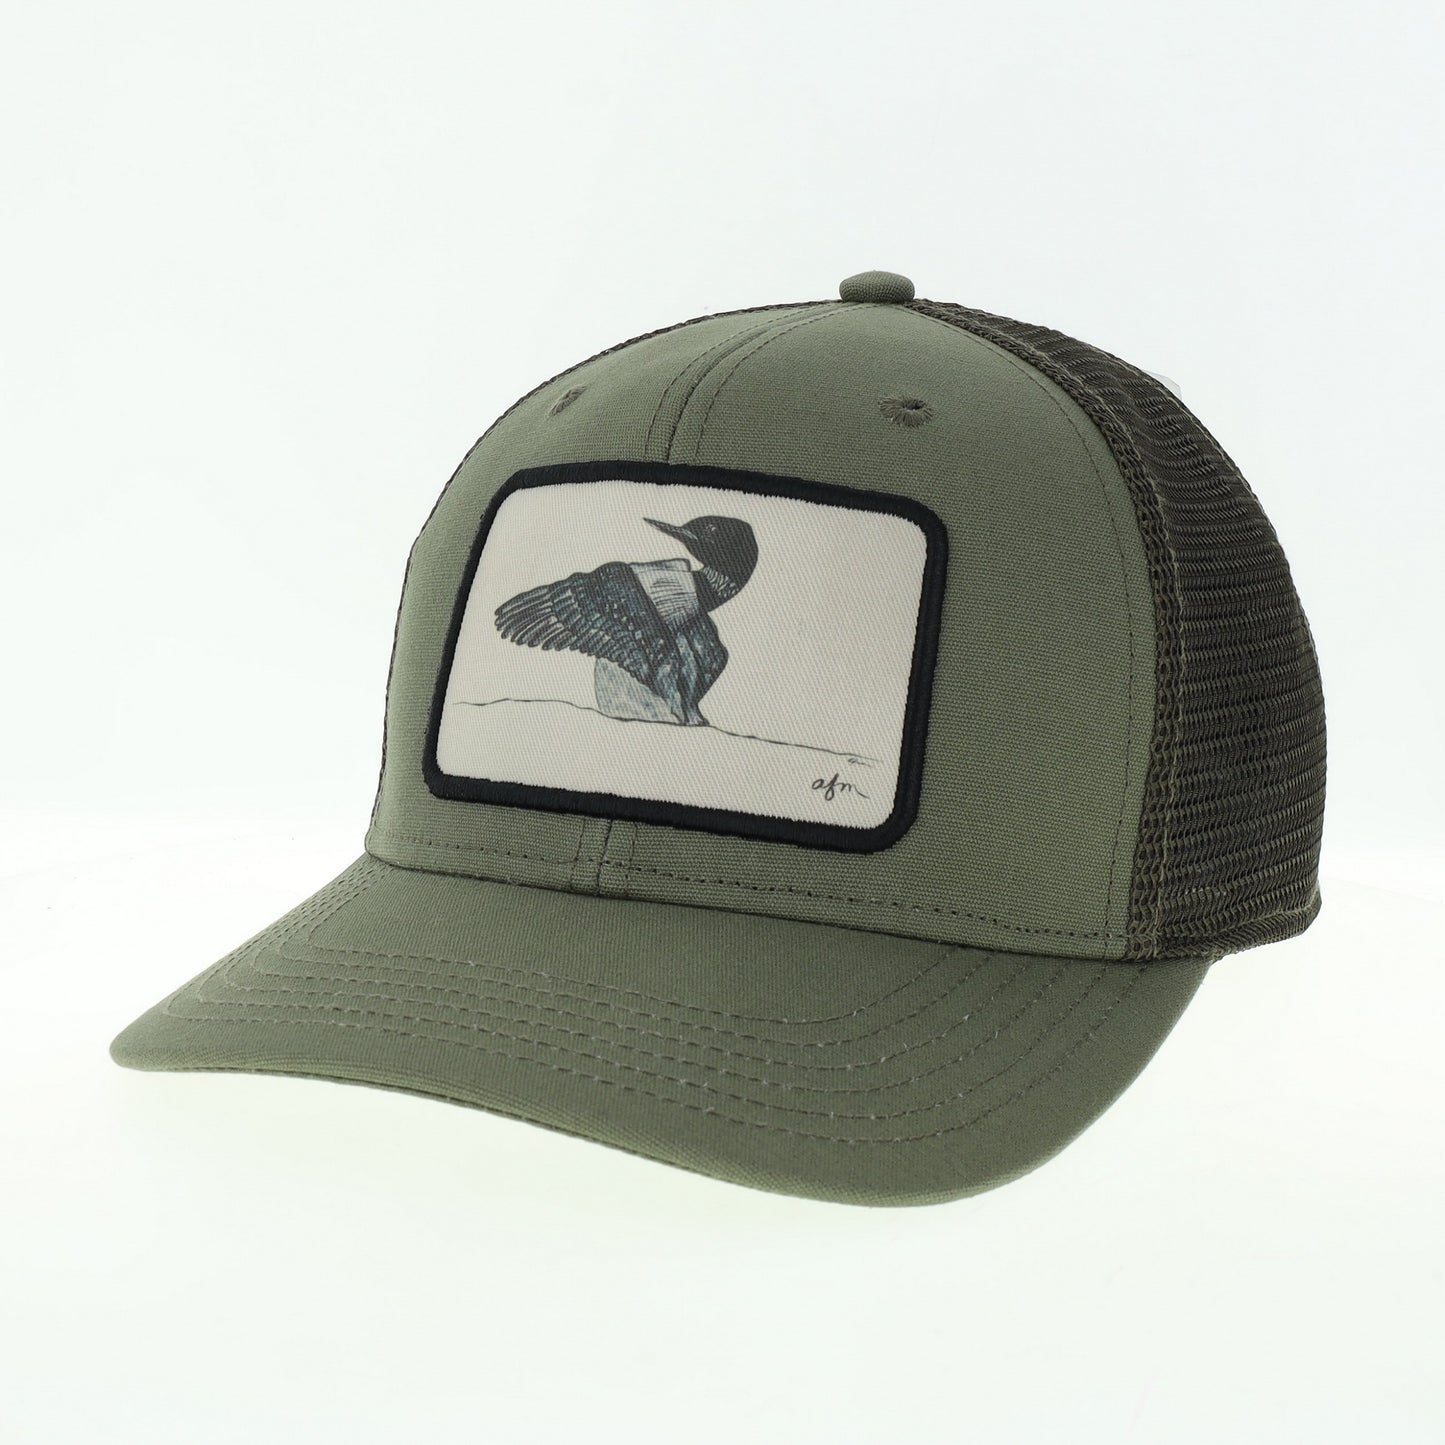 Loon Mid-Pro Trucker Hat in Olive/Olive